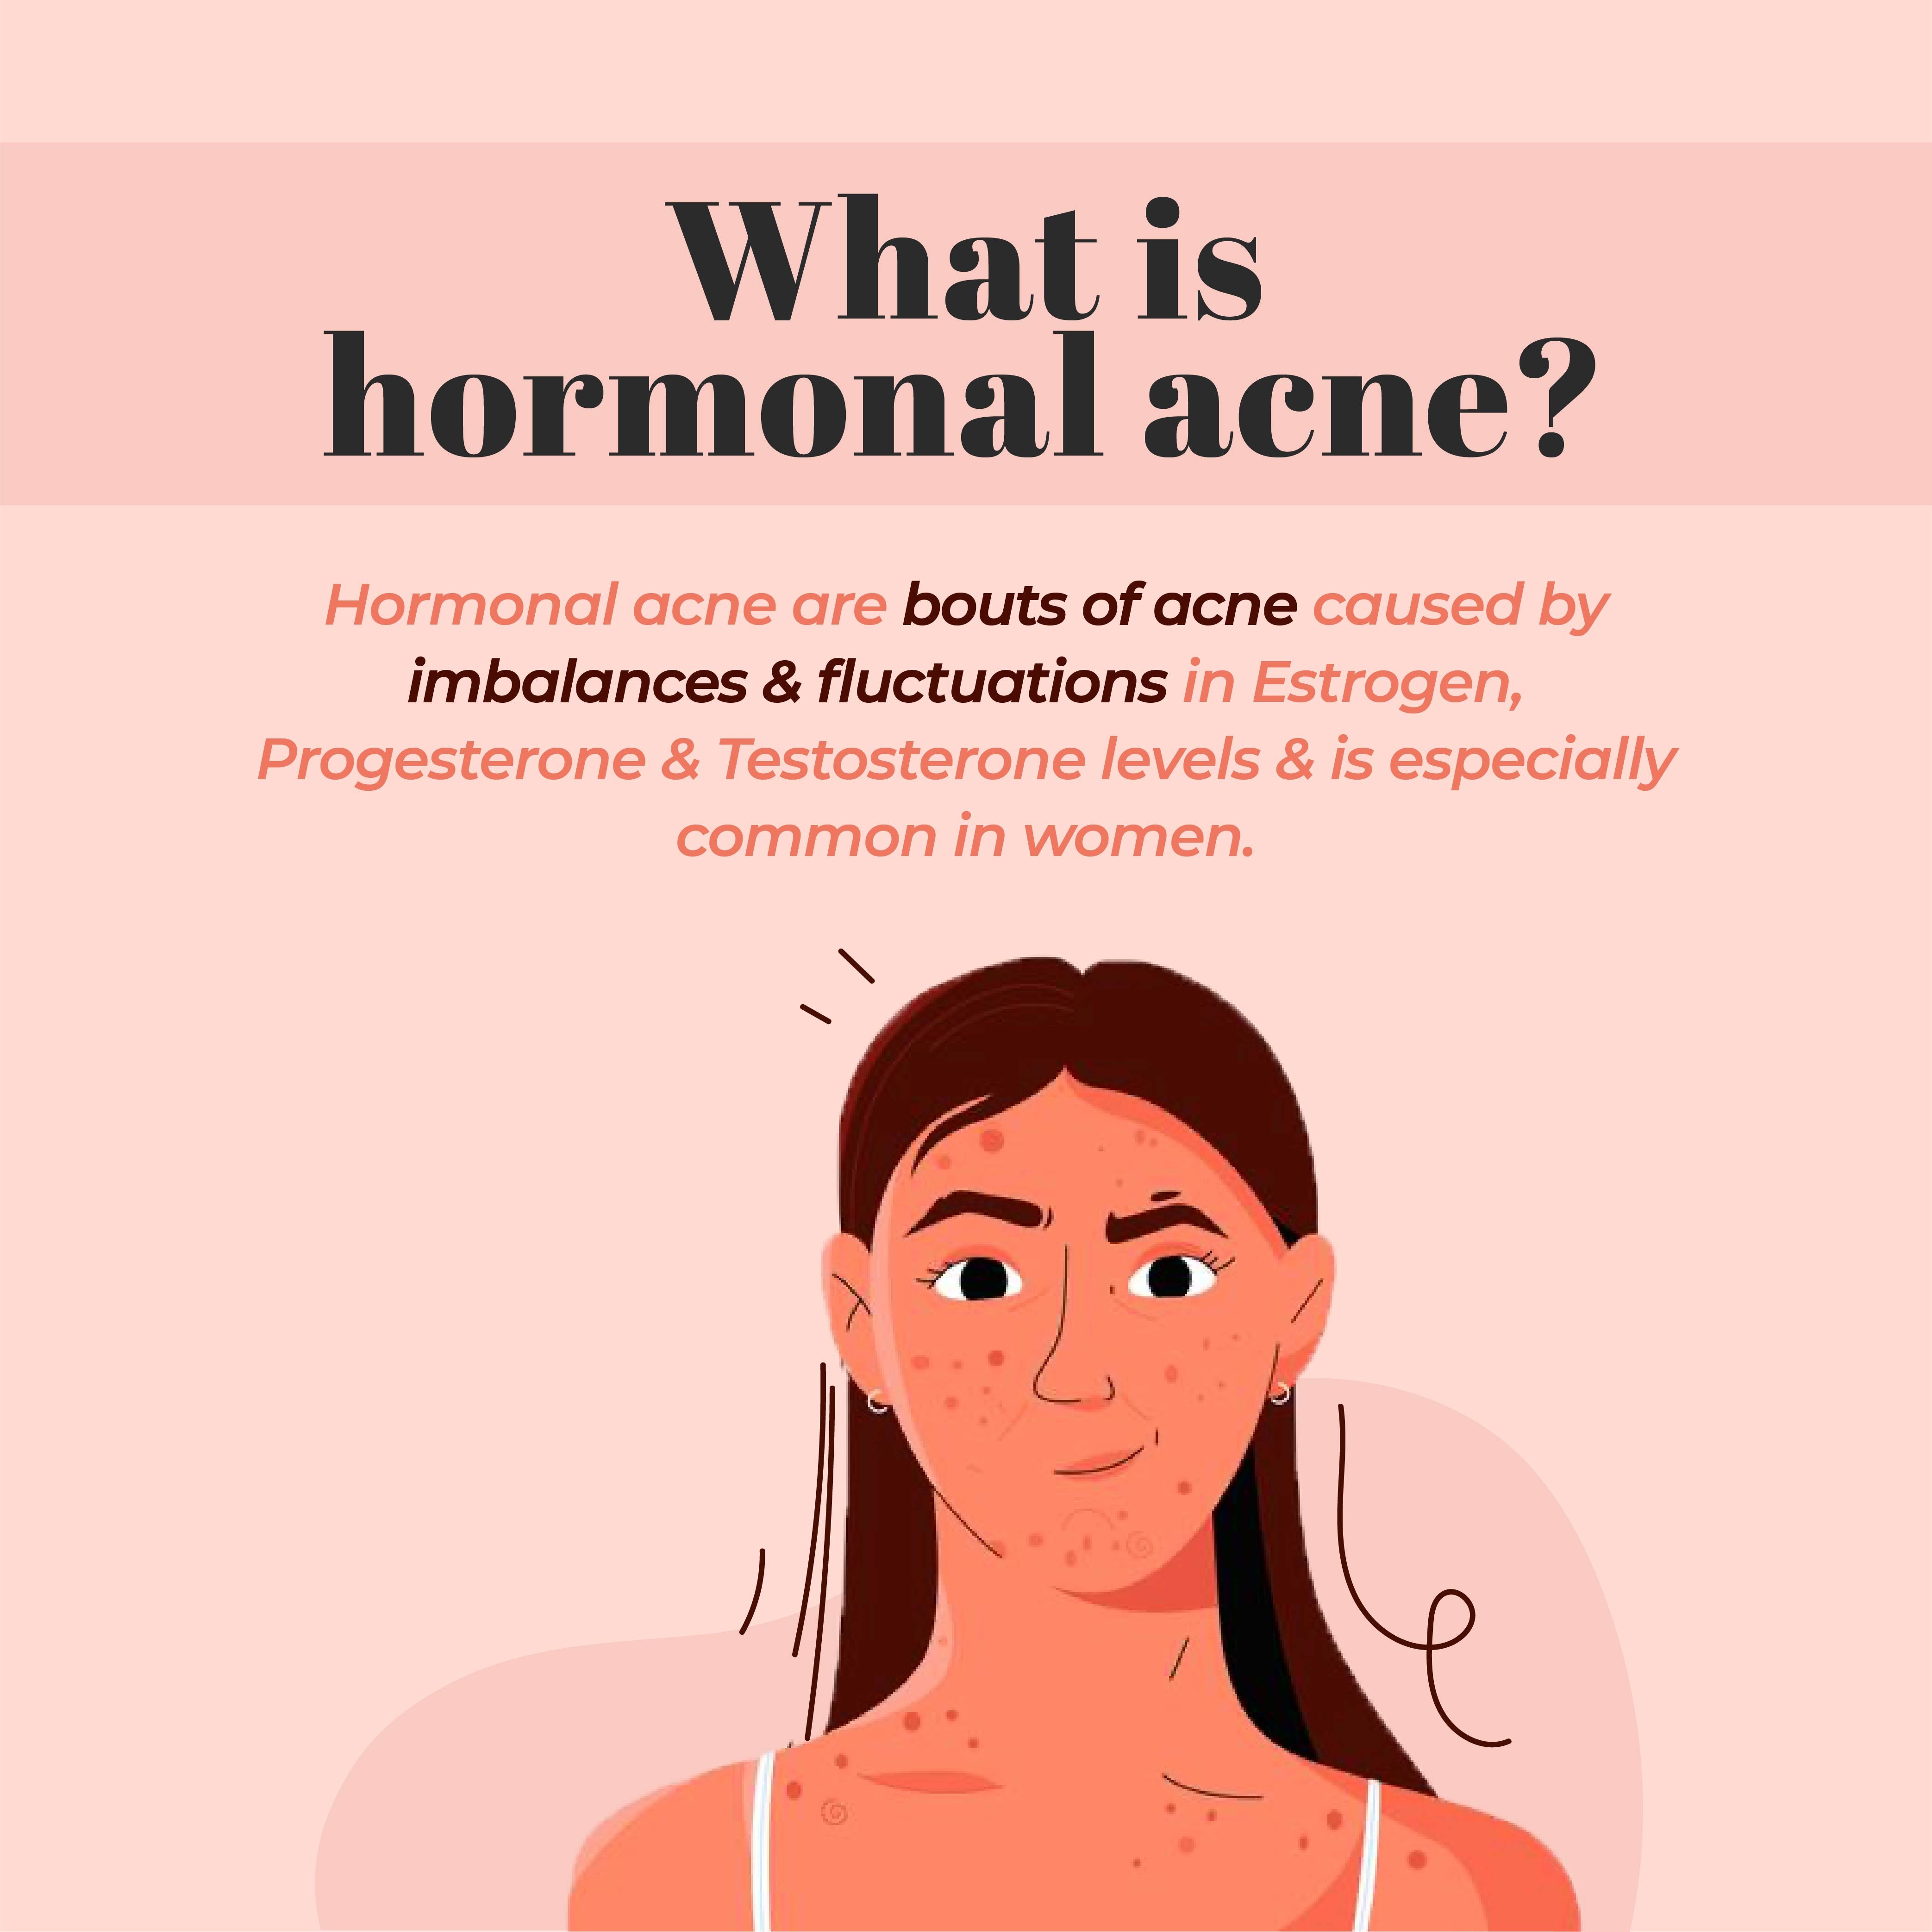 This is an image of what is hormonal acne